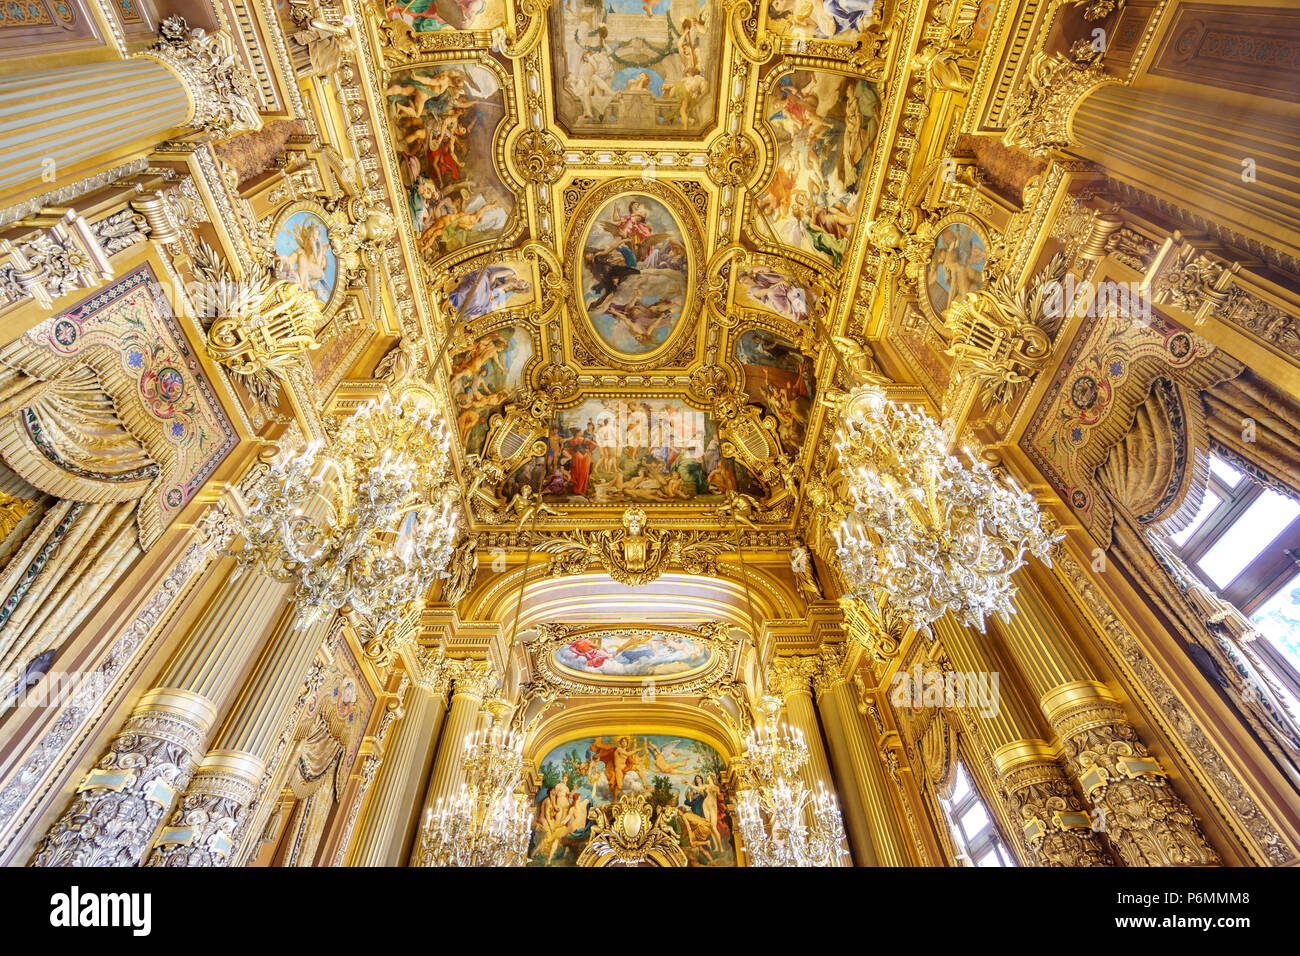 PARIS, France, MAY 17: View of the unbelievable roof of Opera de Paris, Palais Garnier, It was built from 1861 to 1875 on MAY 17, 2015 in Paris. Stock Photo